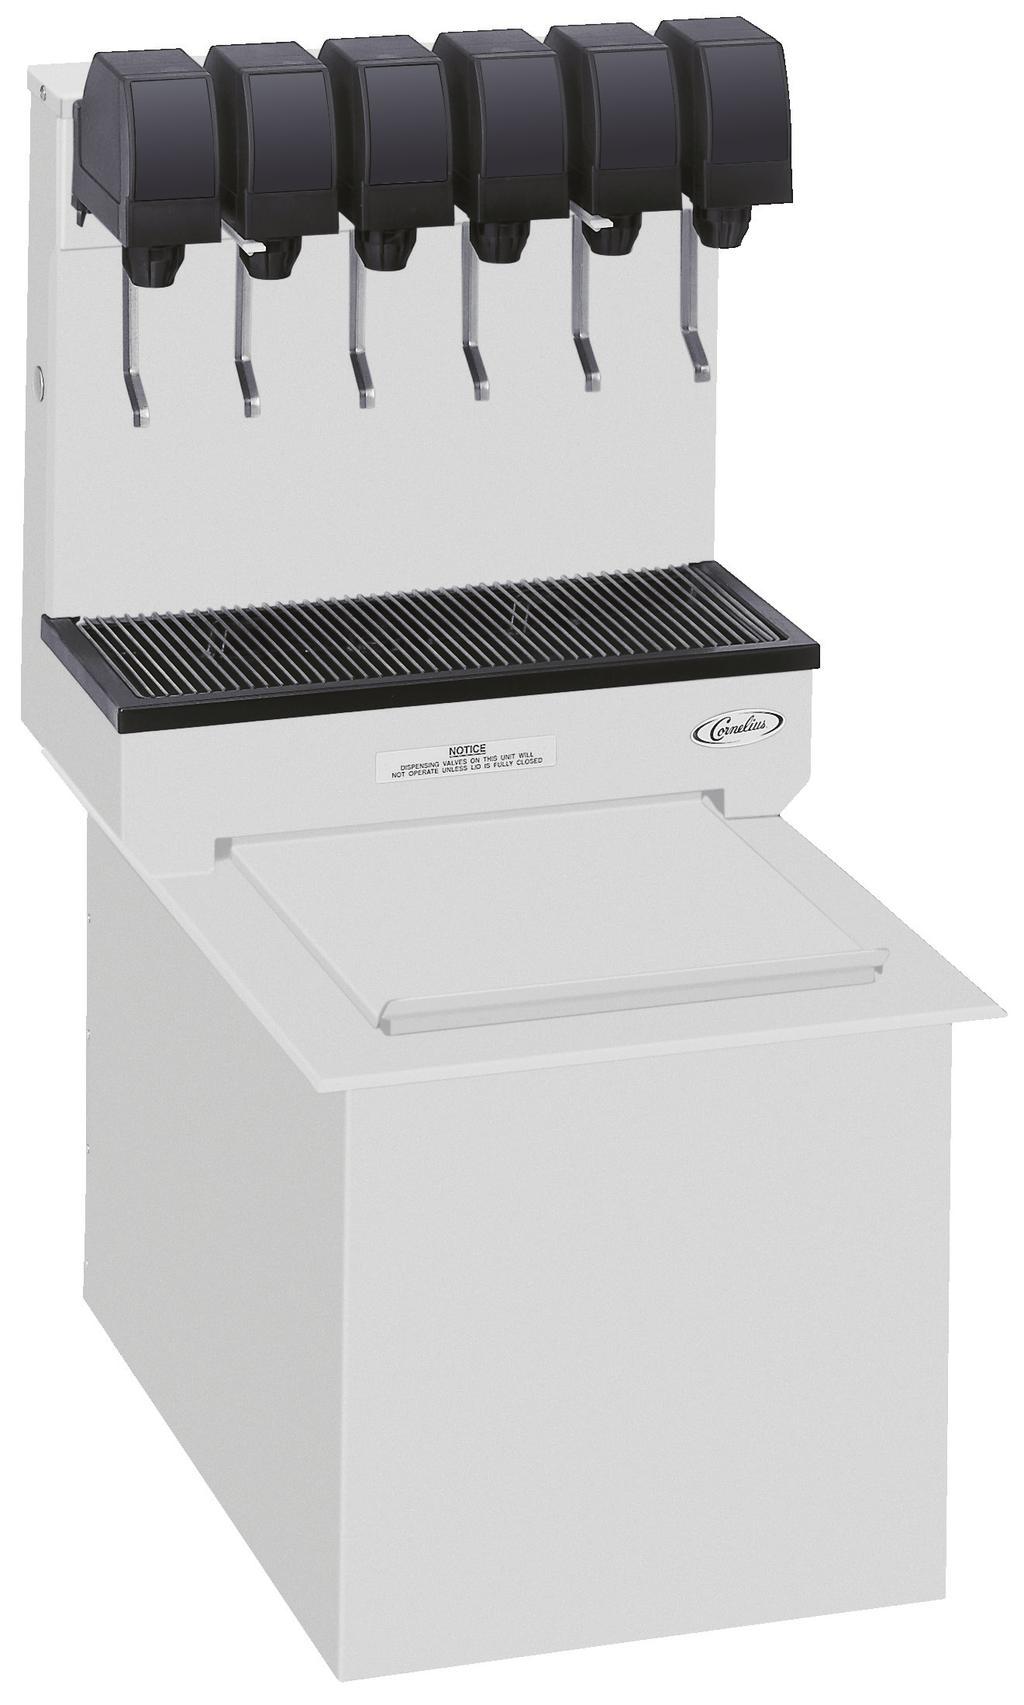 1522 POST-MIX DROP-IN DISPENSER FEATURES Large ice capacity - Ice